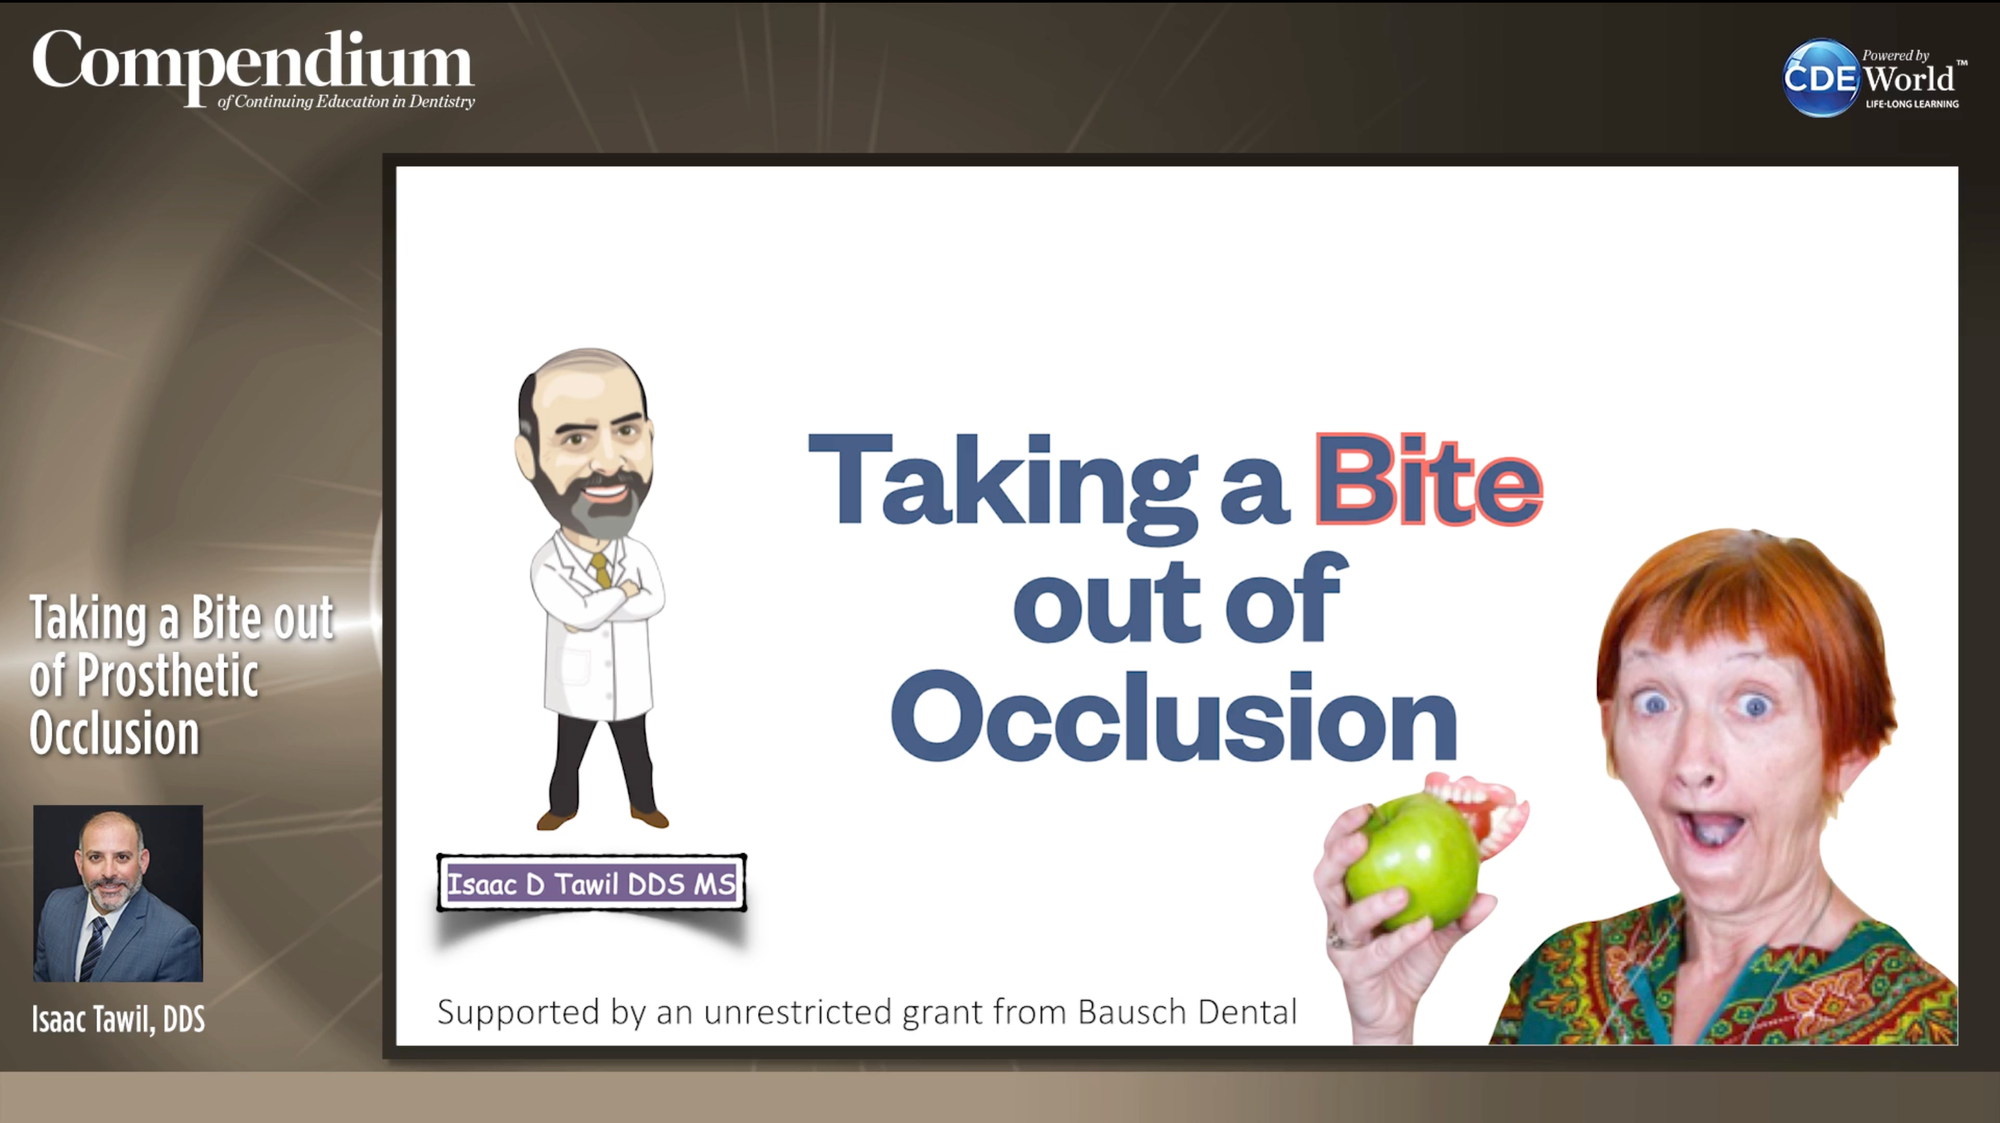 Taking a Bite out of Prosthetic Occlusion